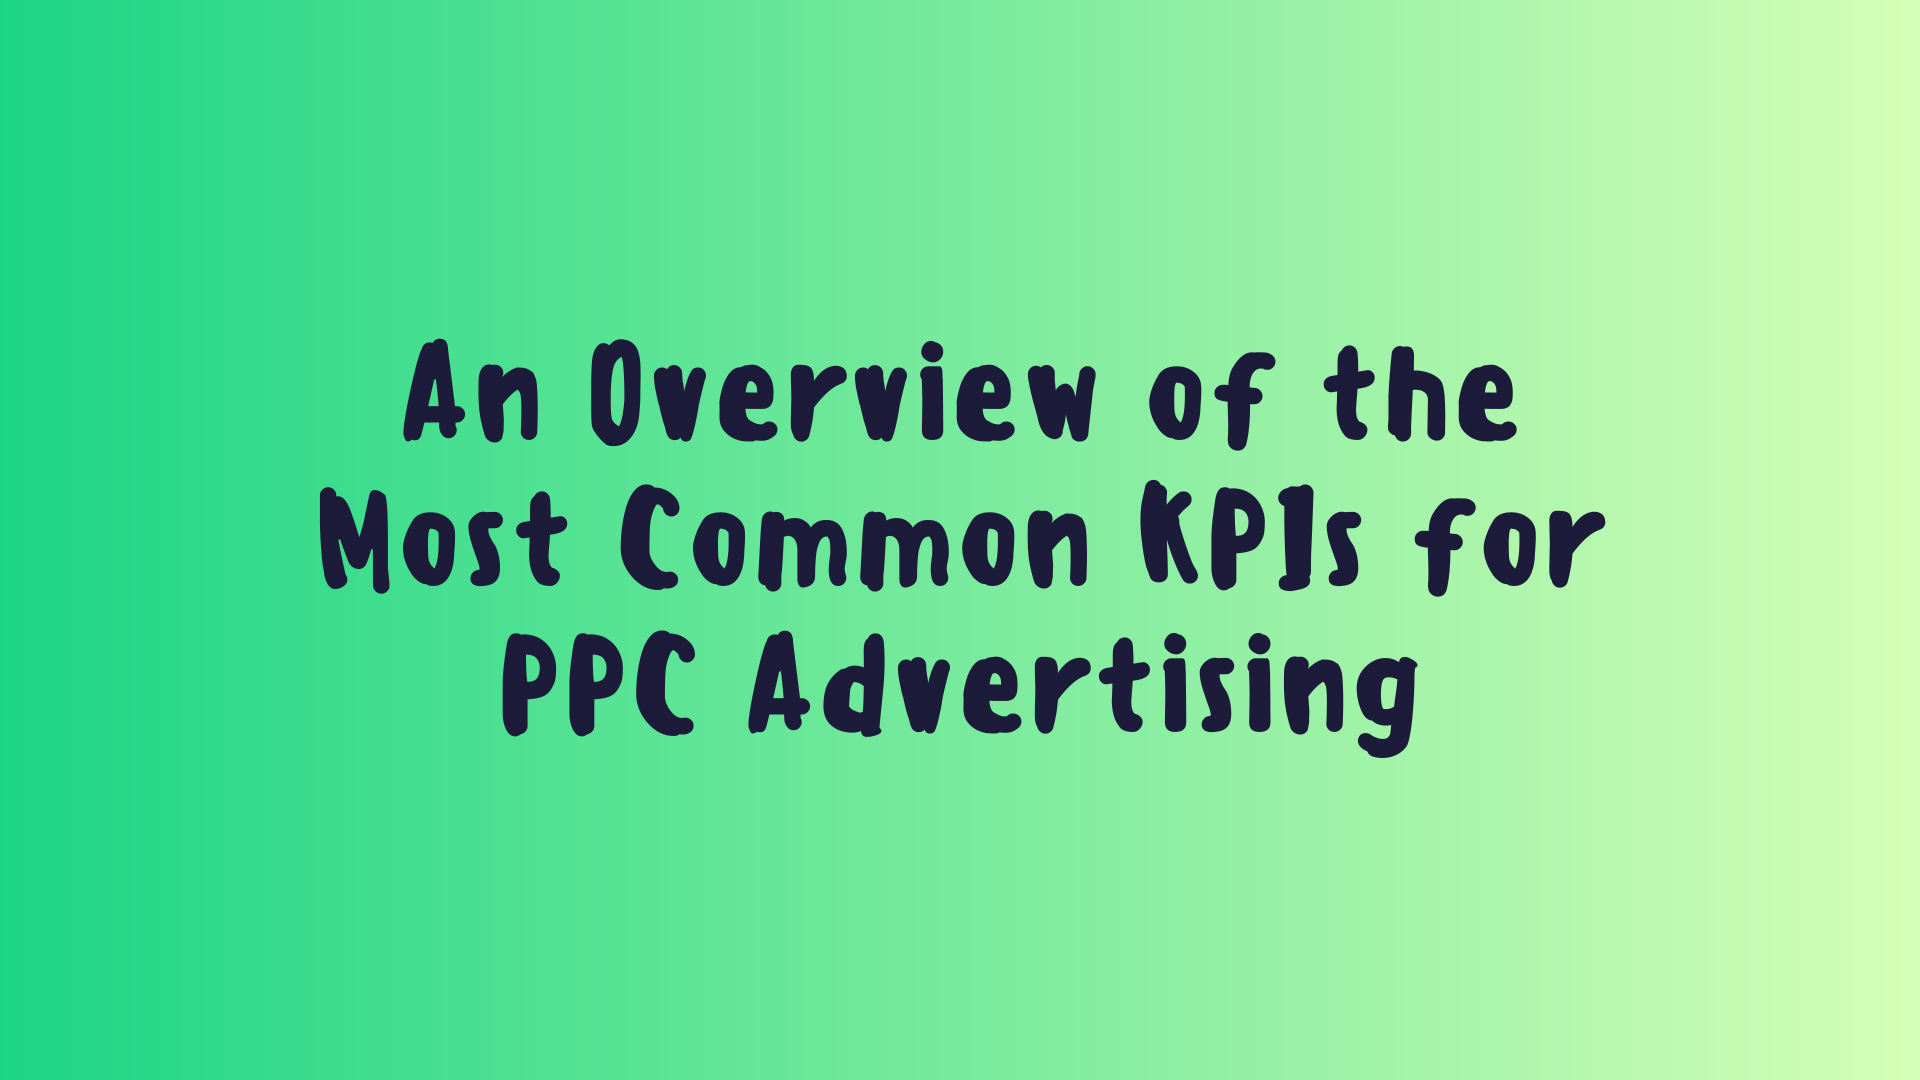 An Overview of the Most Common KPIs for PPC Advertising